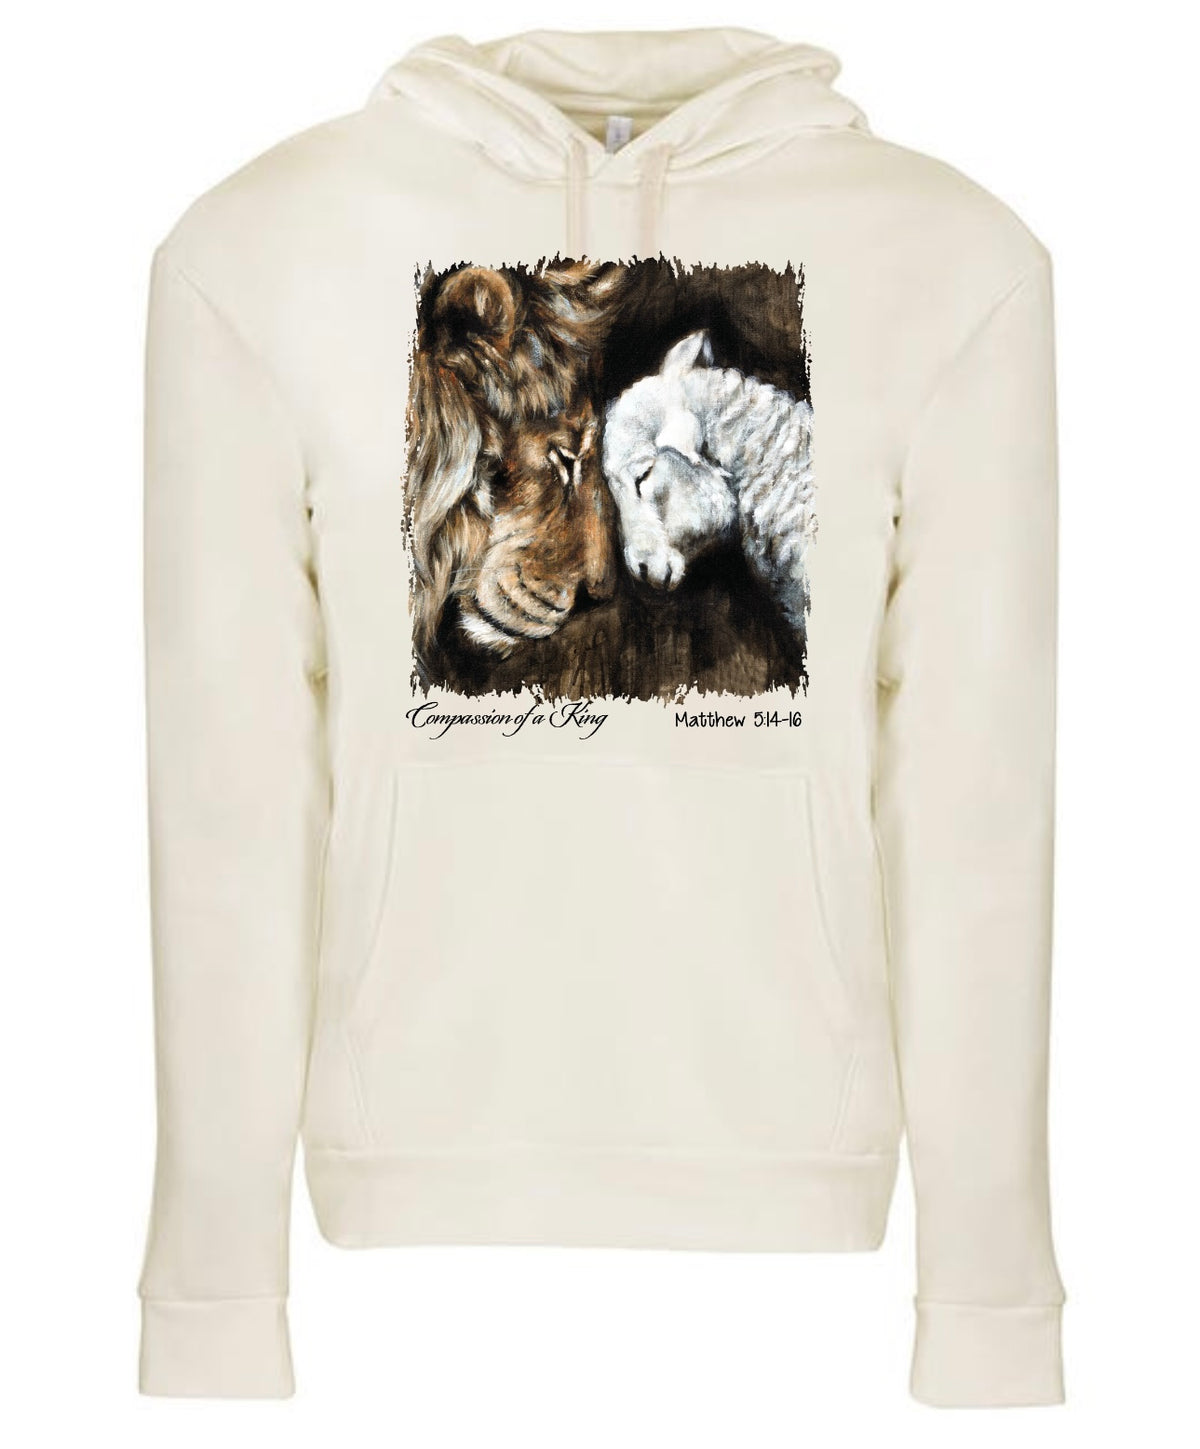 Compassion of a King, Unisex Hooded Sweatshirt - COLORS DISCONTINUED